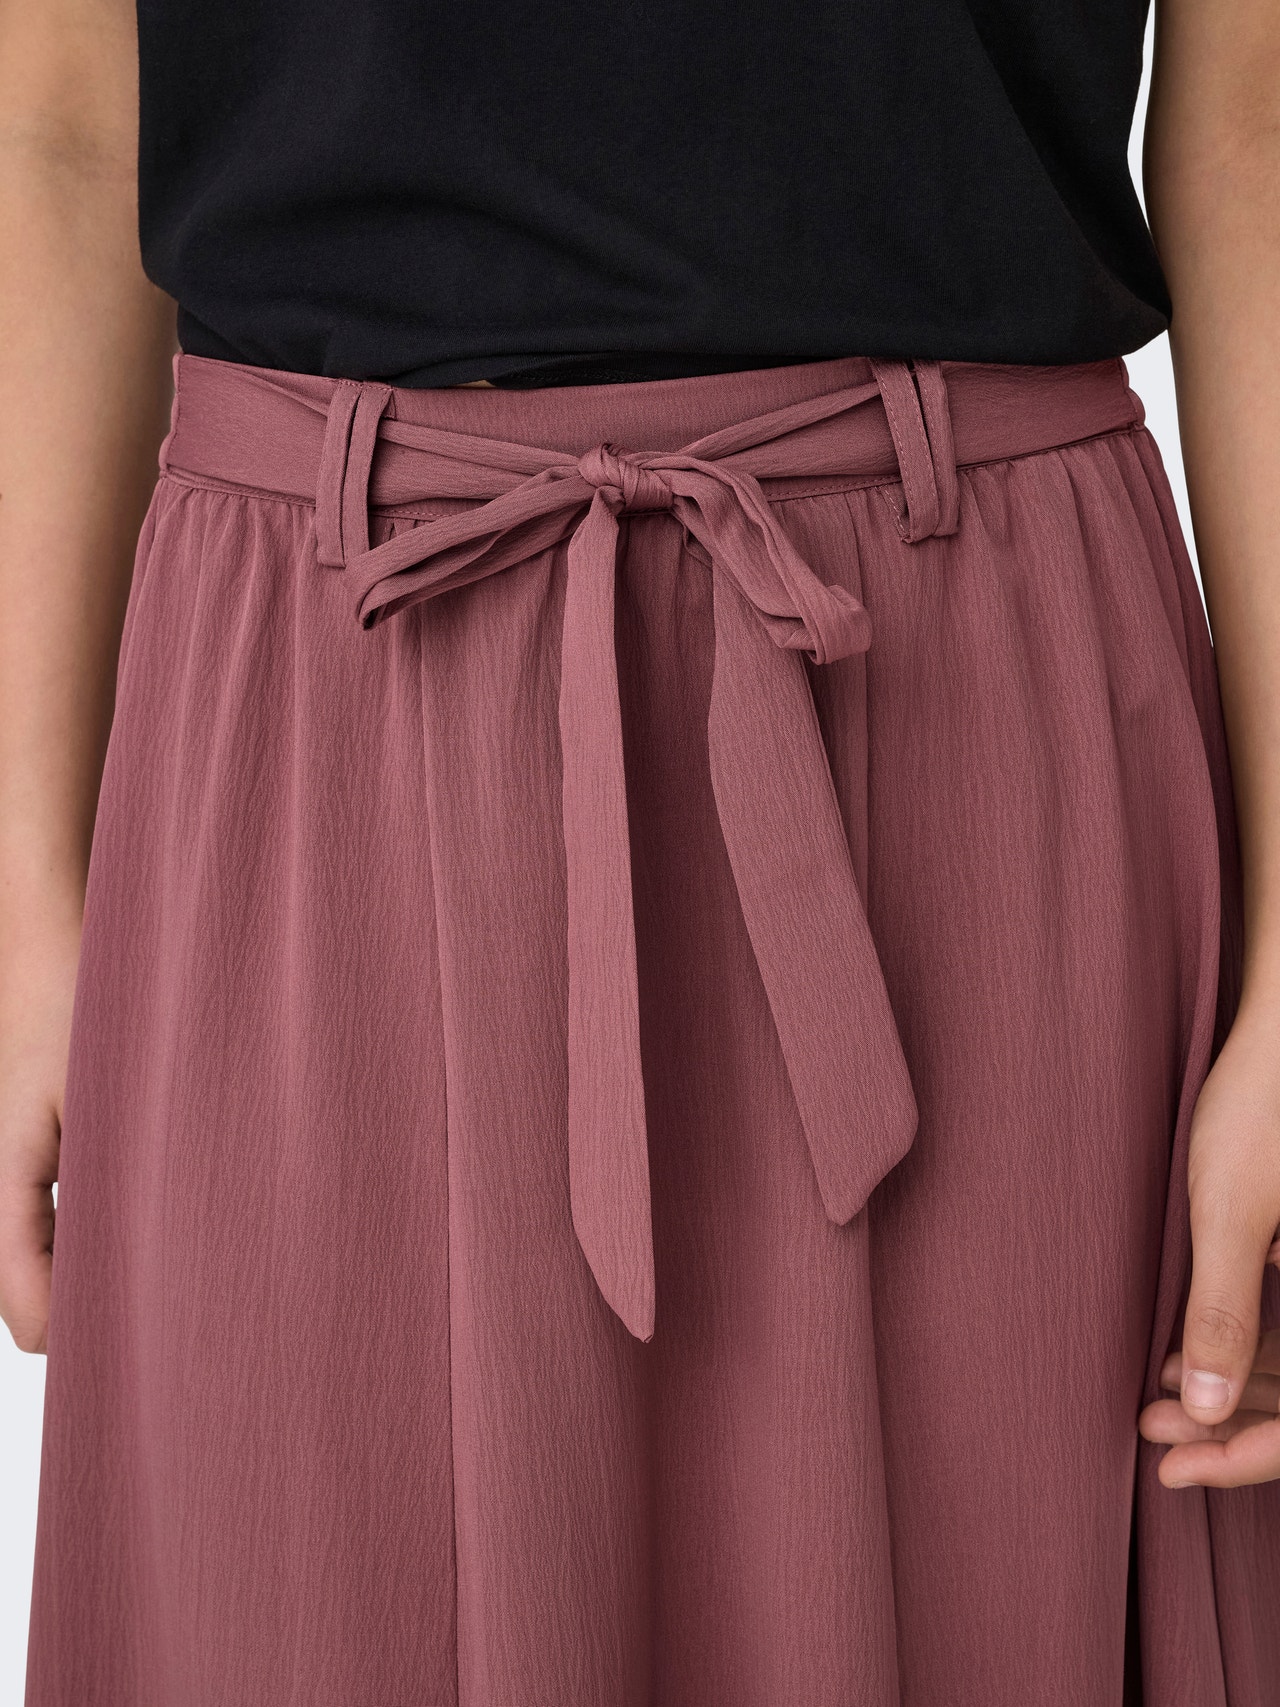 ONLY Maxi skirt with belt -Rose Brown - 15335565